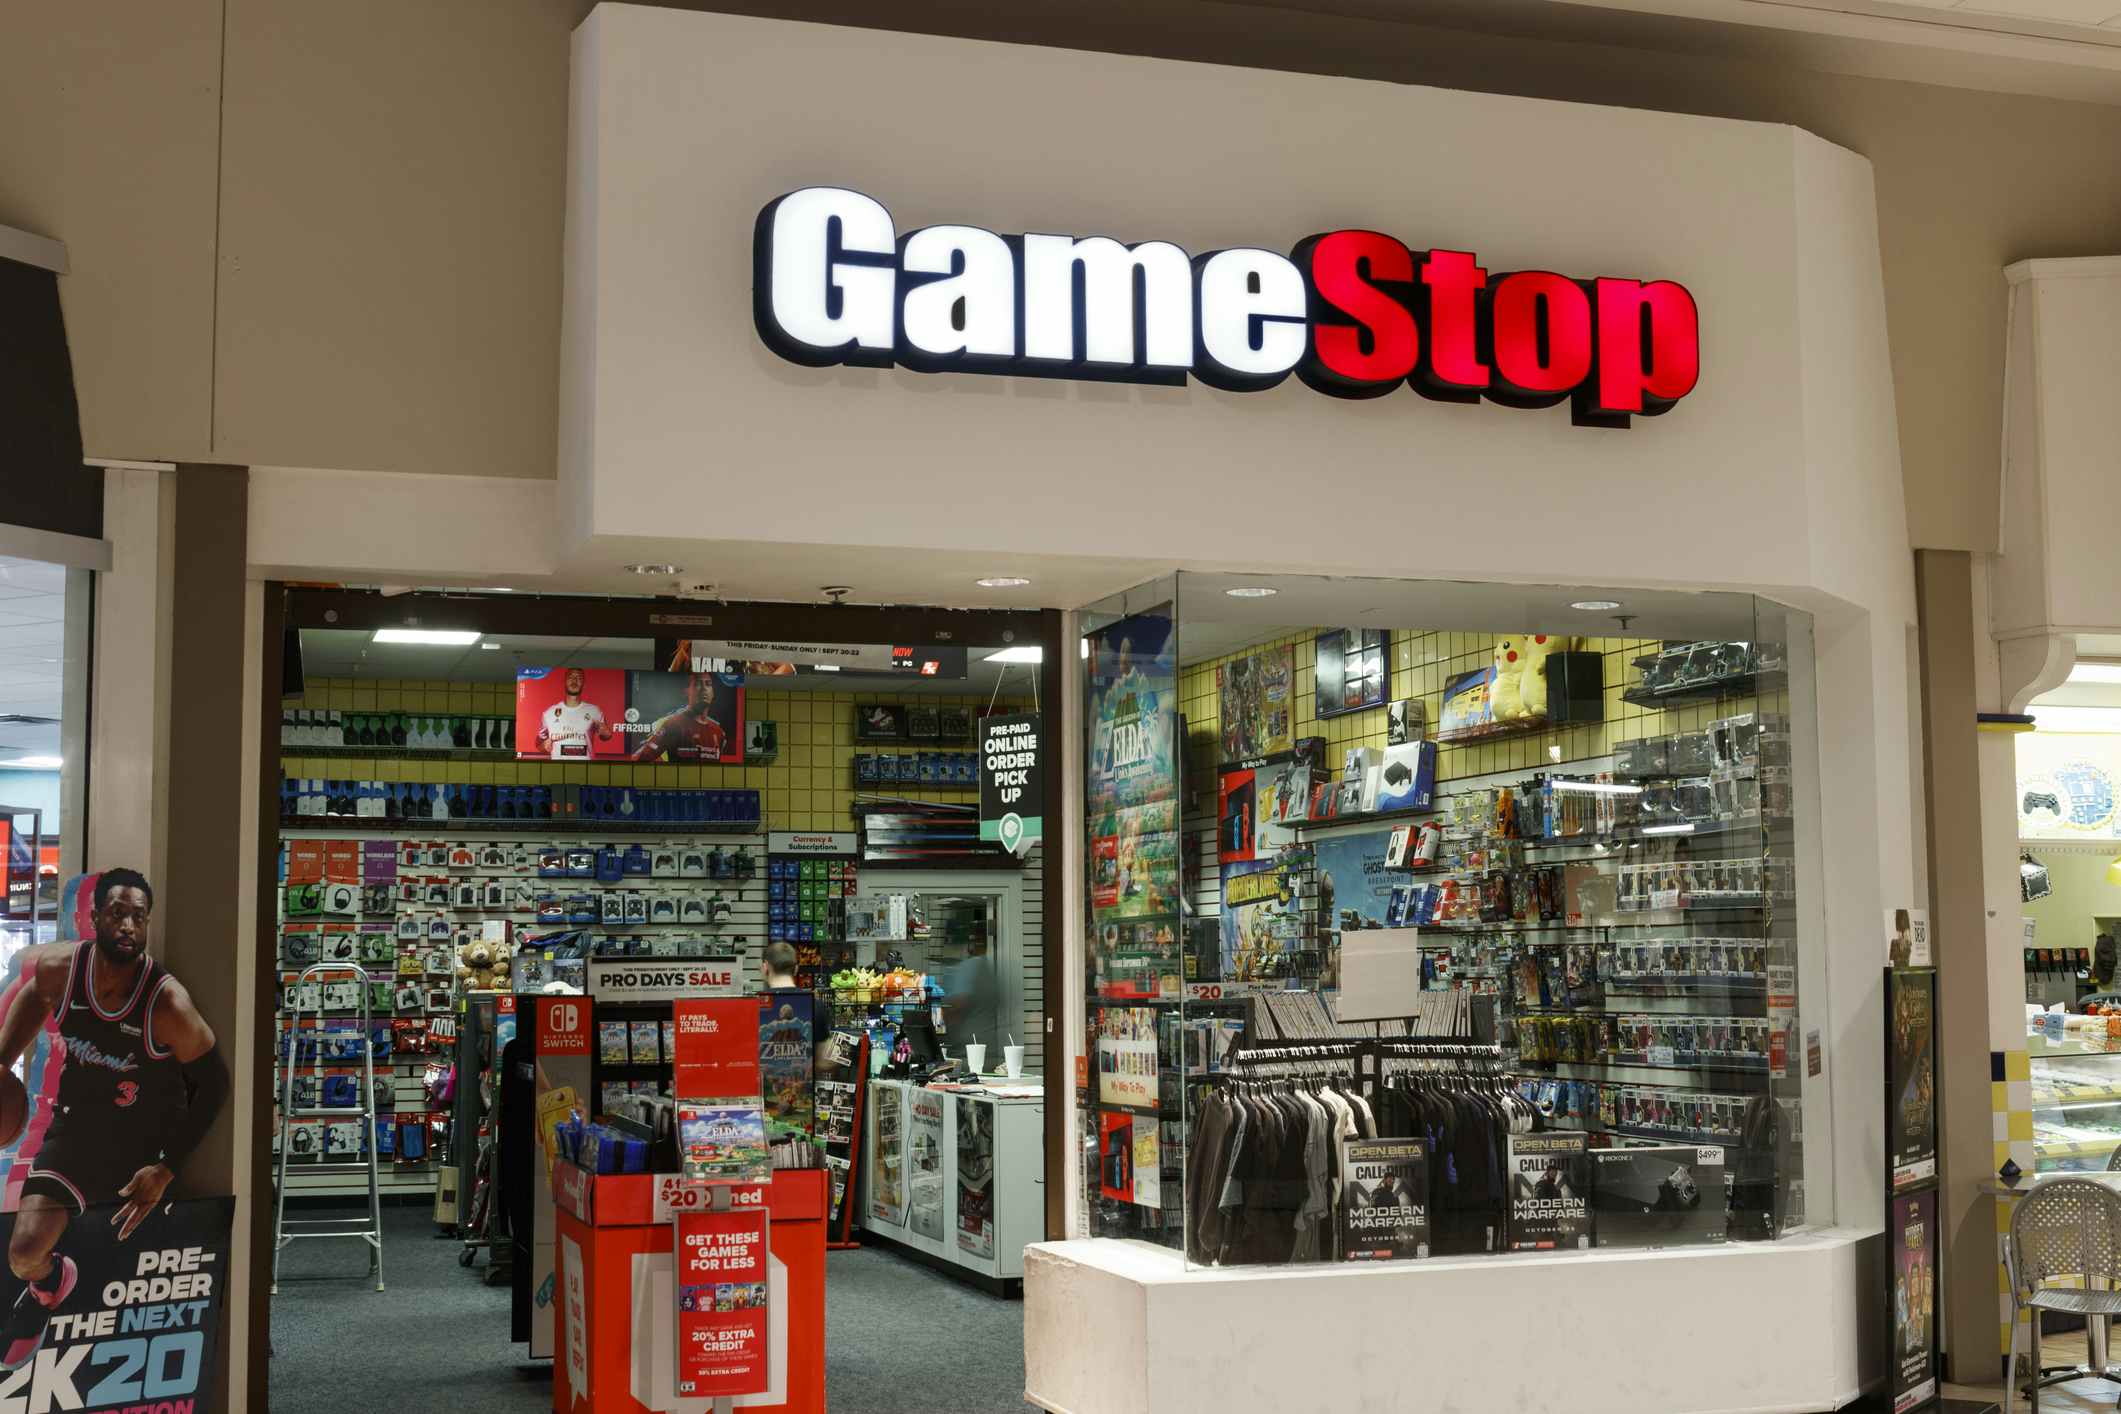 GameStop to Close 200 Stores - Will Kalamazoo Be Affected?